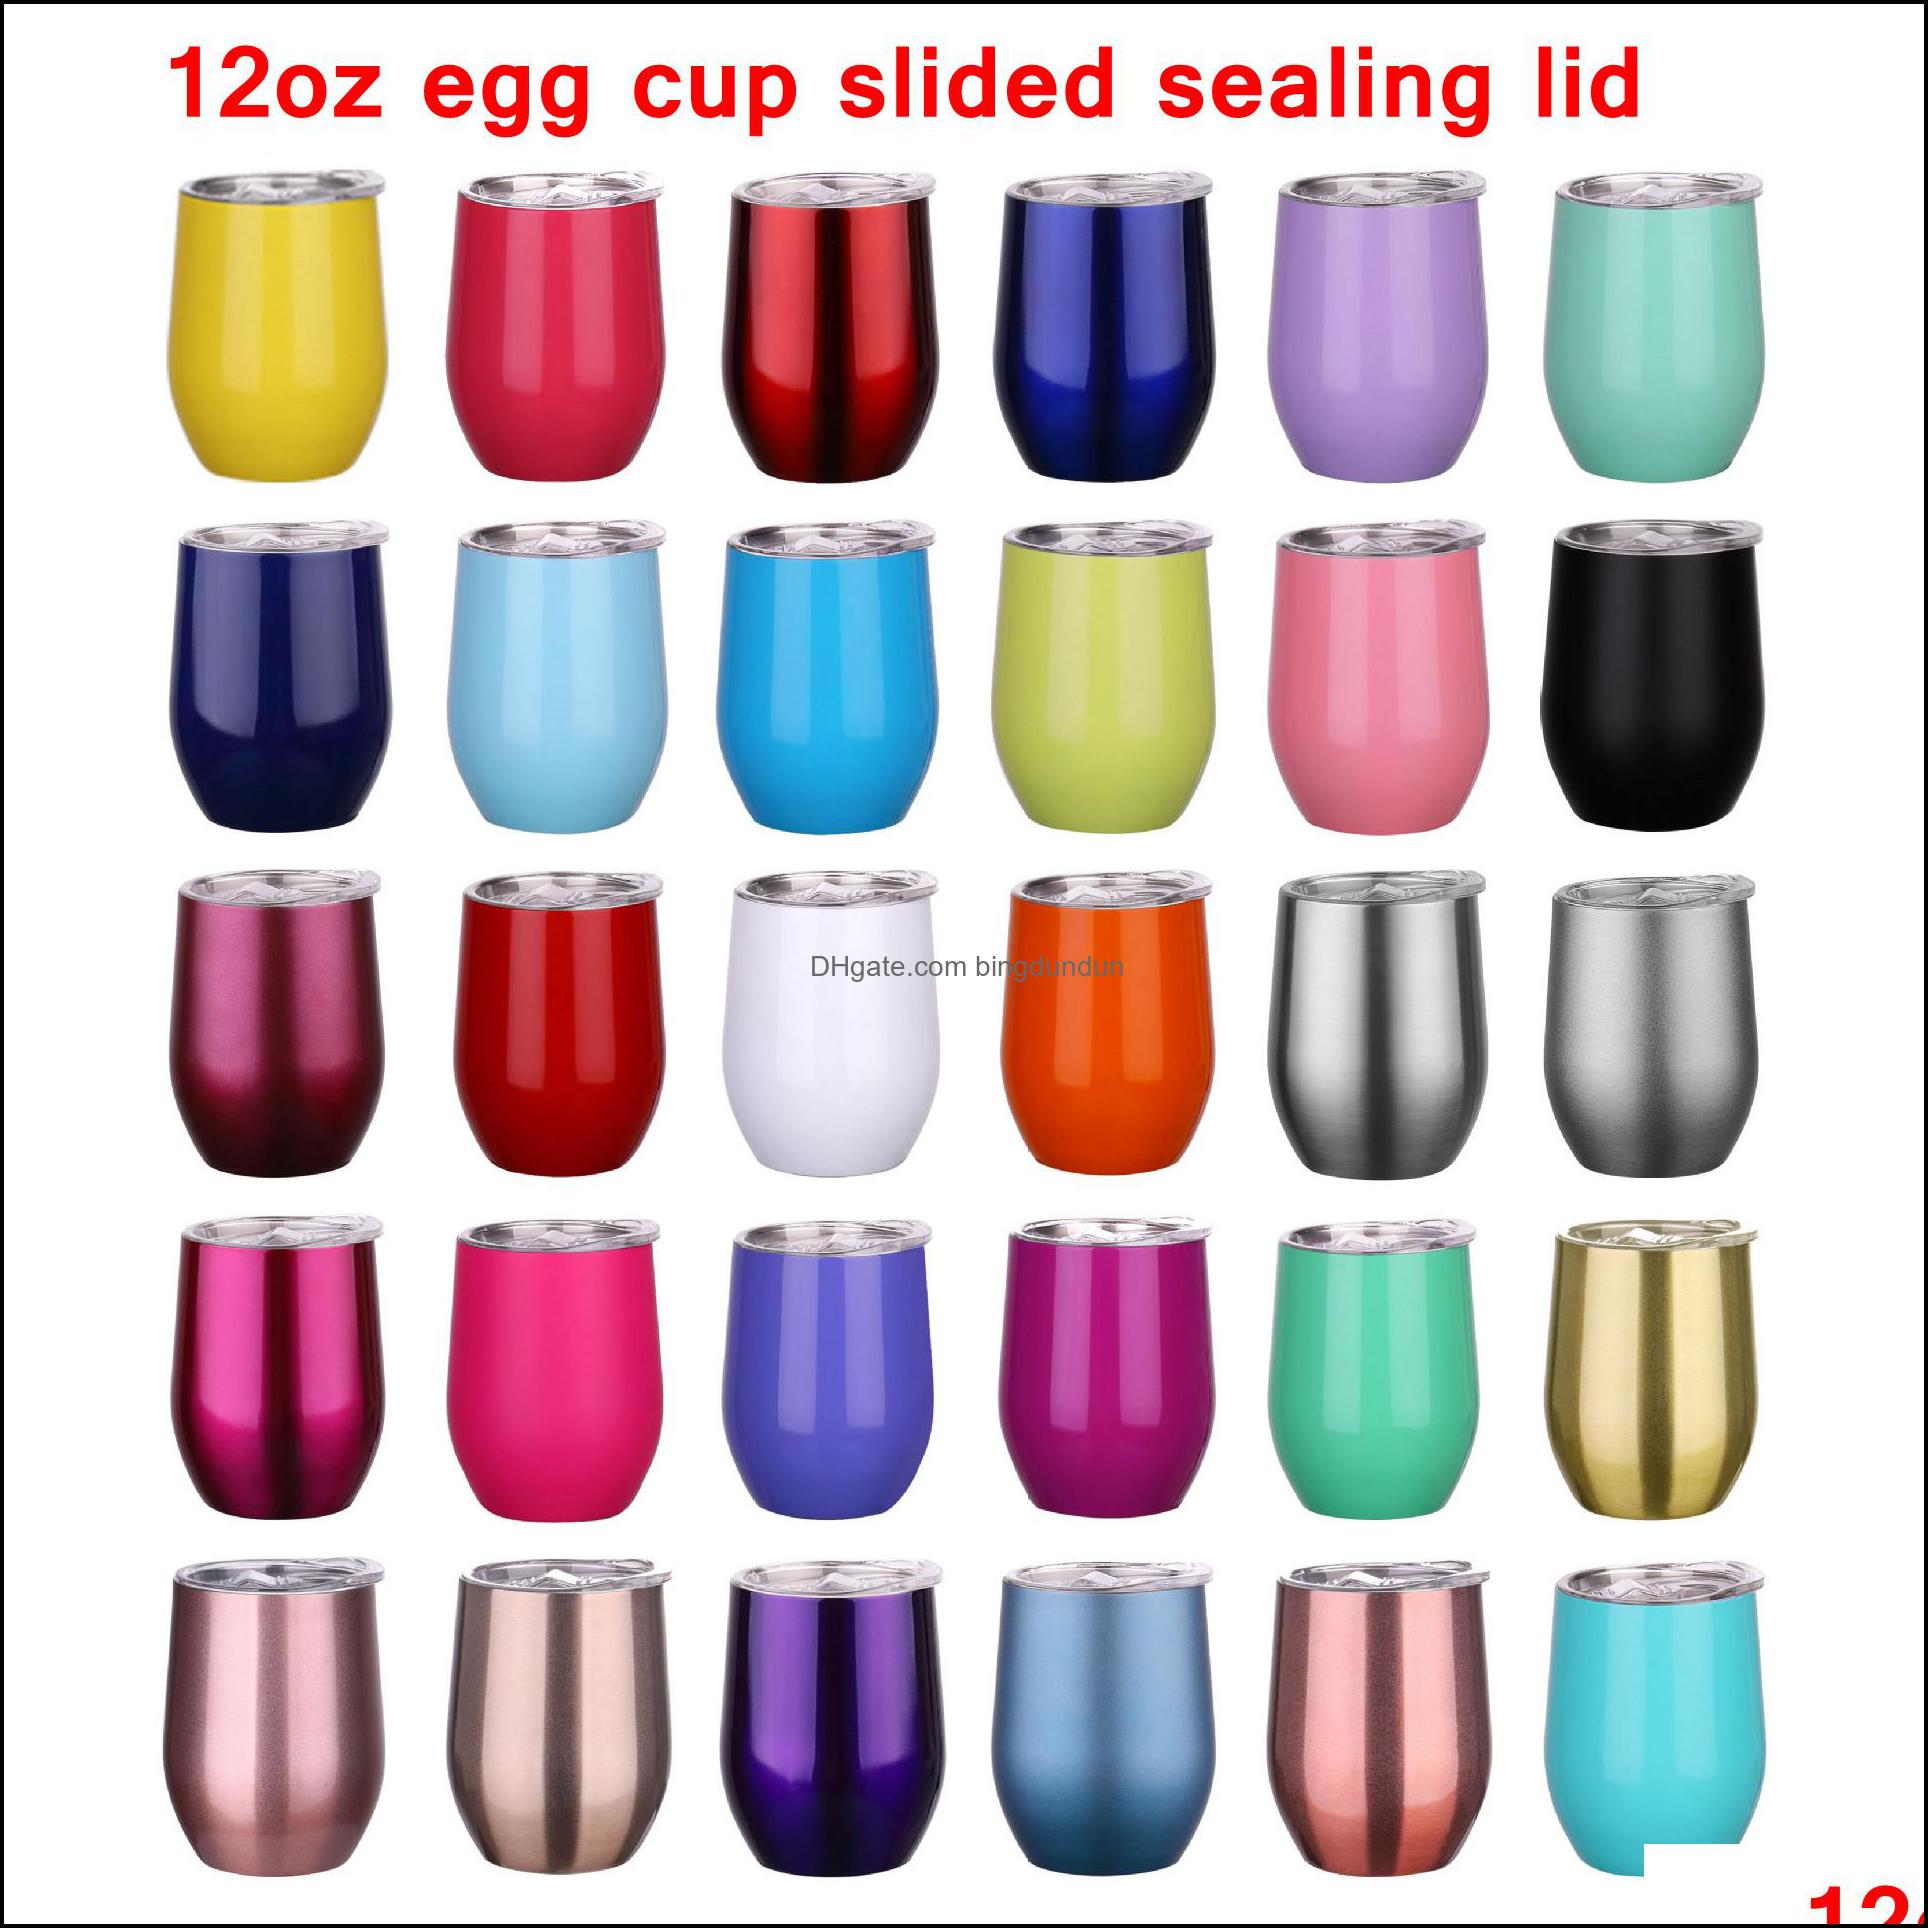 

Mugs 12Oz Egg Cup Mug Stainless Steel Wine Tumbler Double Wall Eggs Shape Cups Tumblers With Sealing Lid Insated Glasses Drinkware F Otdz9, With slided sealing lid